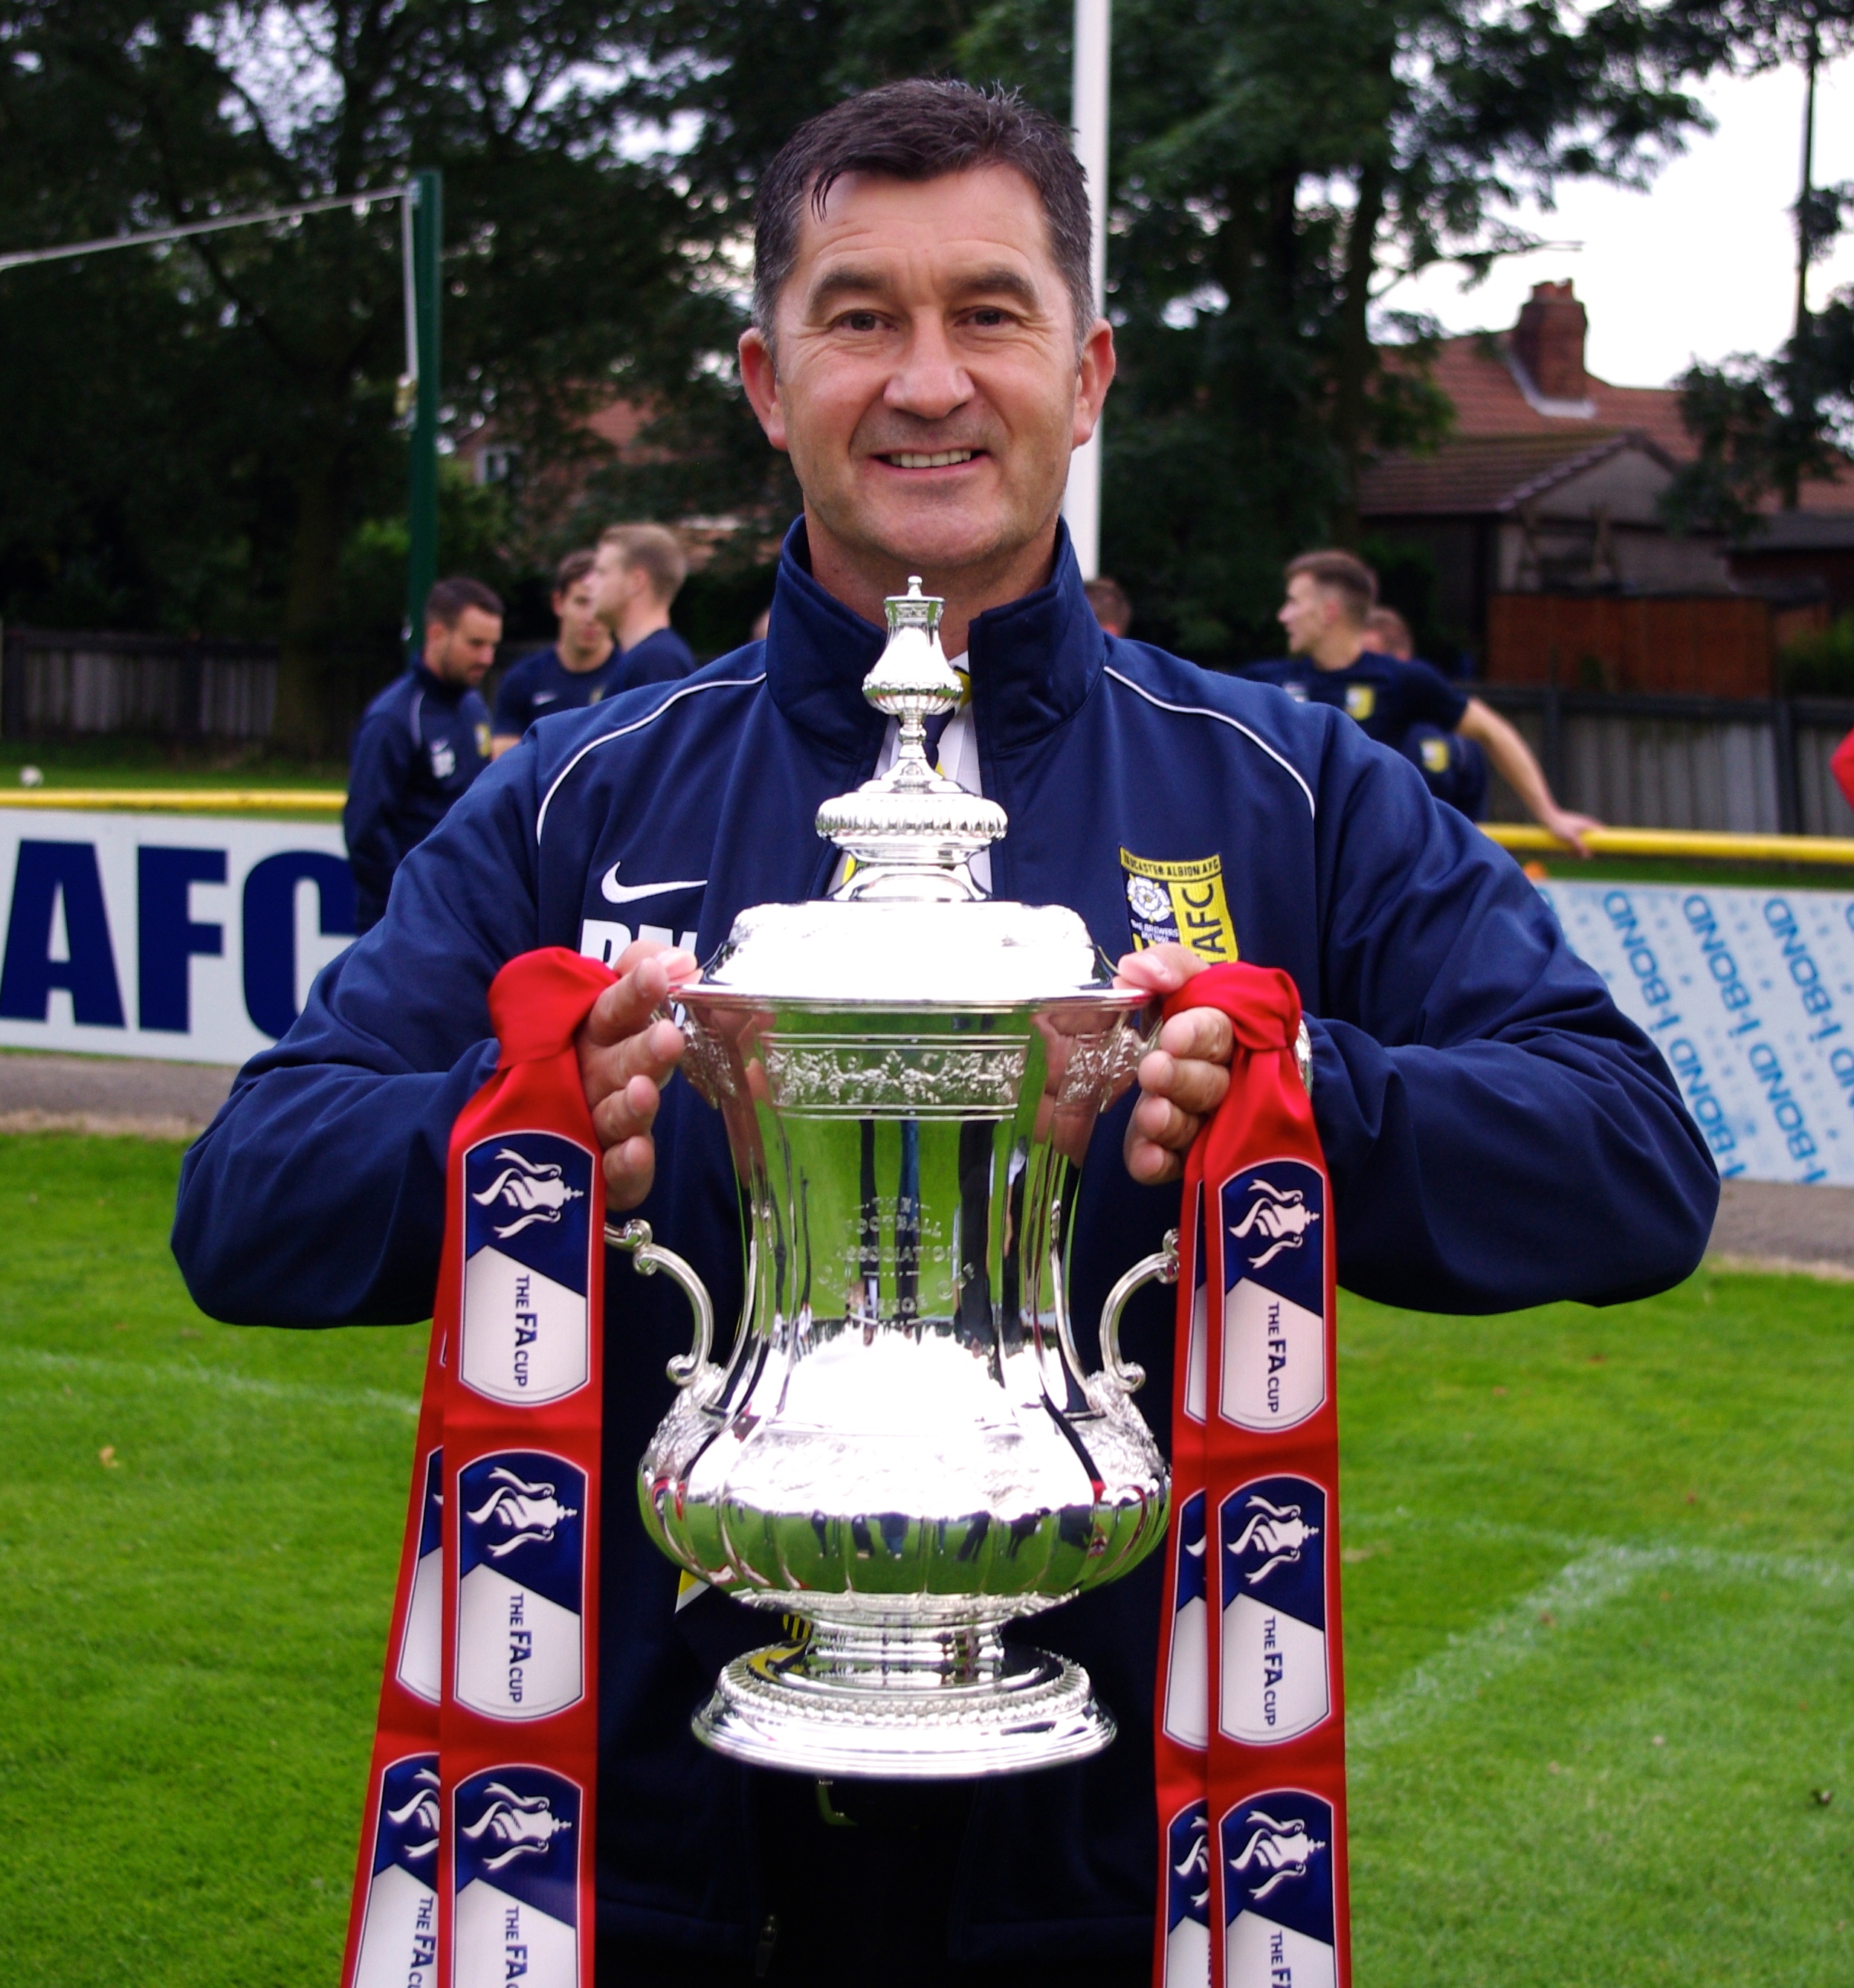 Hear Tadcaster Albion manager Paul Marshall's thoughts on their FA Cup Preliminary Round clash with Spennymoor Town